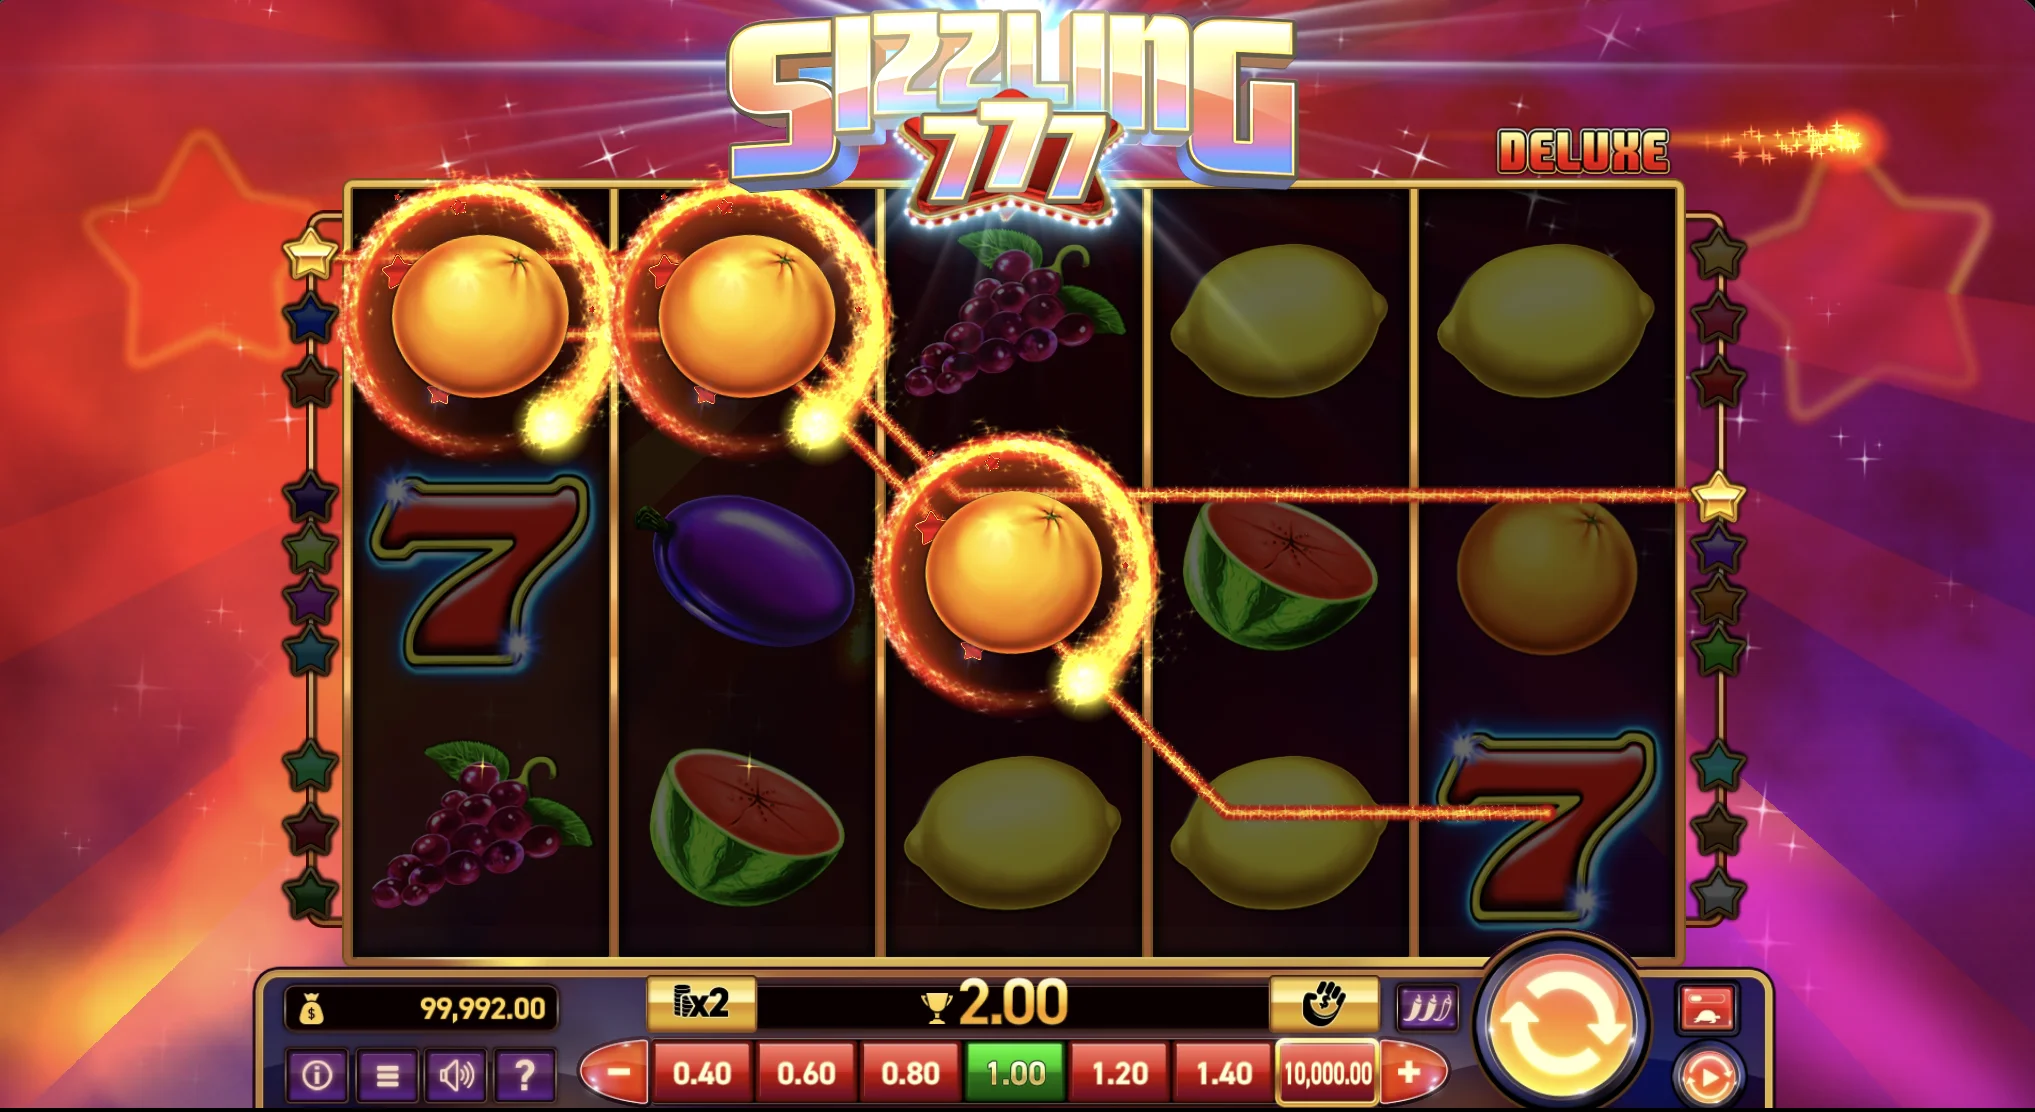 Sizzling 777 Deluxe слот